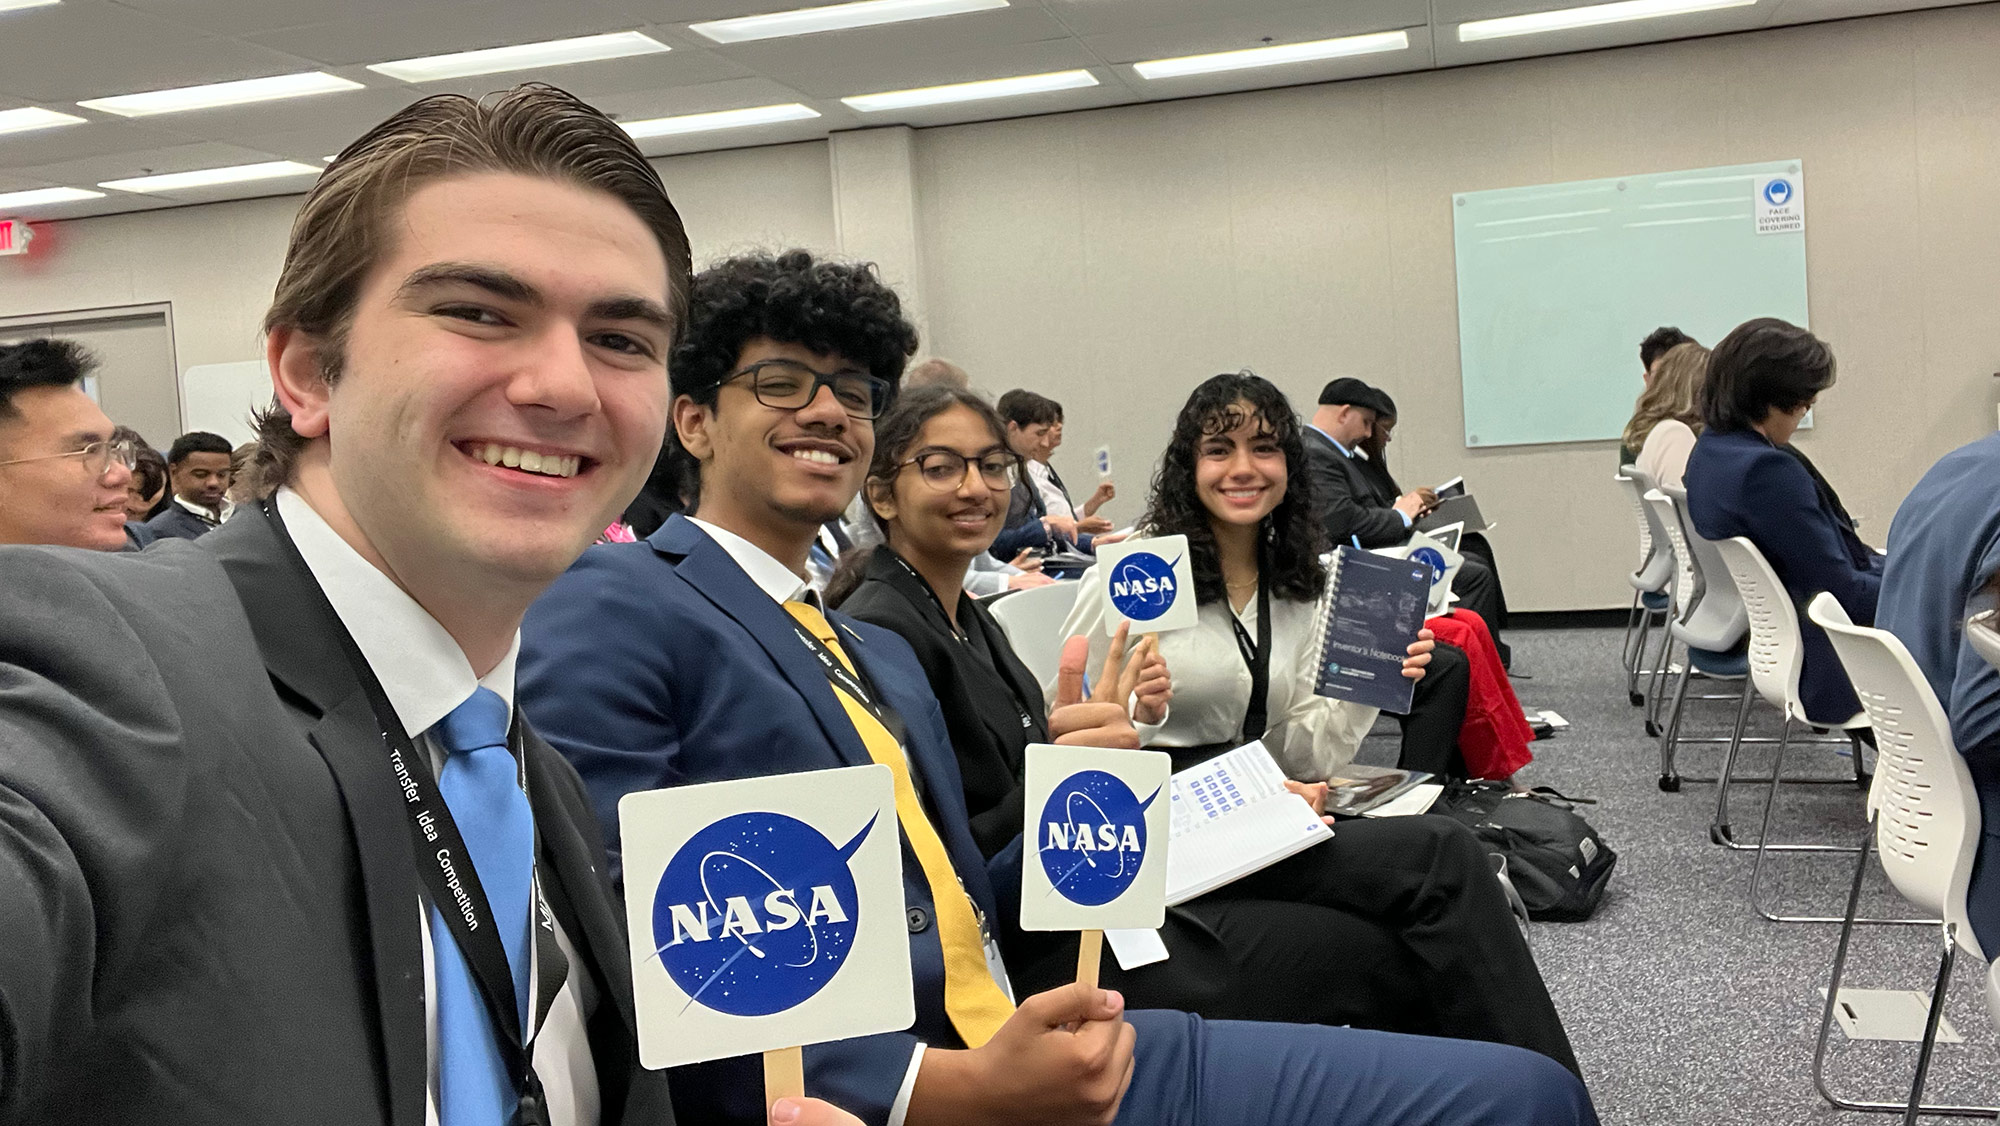 A group of students sitting in a conference room and holding up NASA signs.